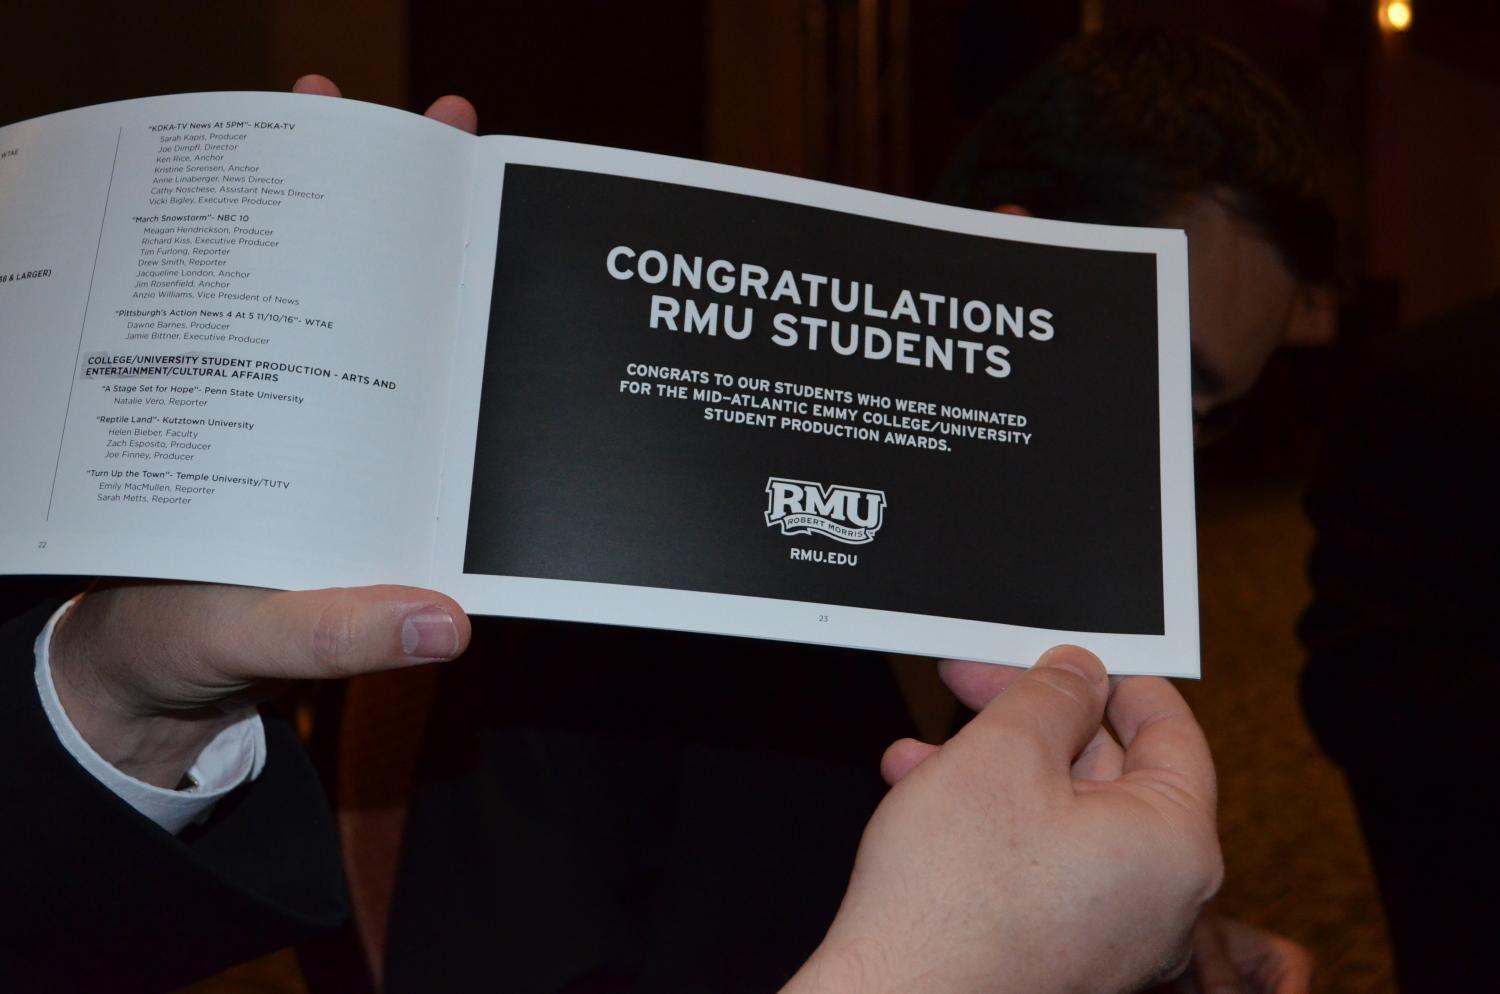 RMU wins 1 out of 4 Mid-Atlantic Emmy College/University nominations